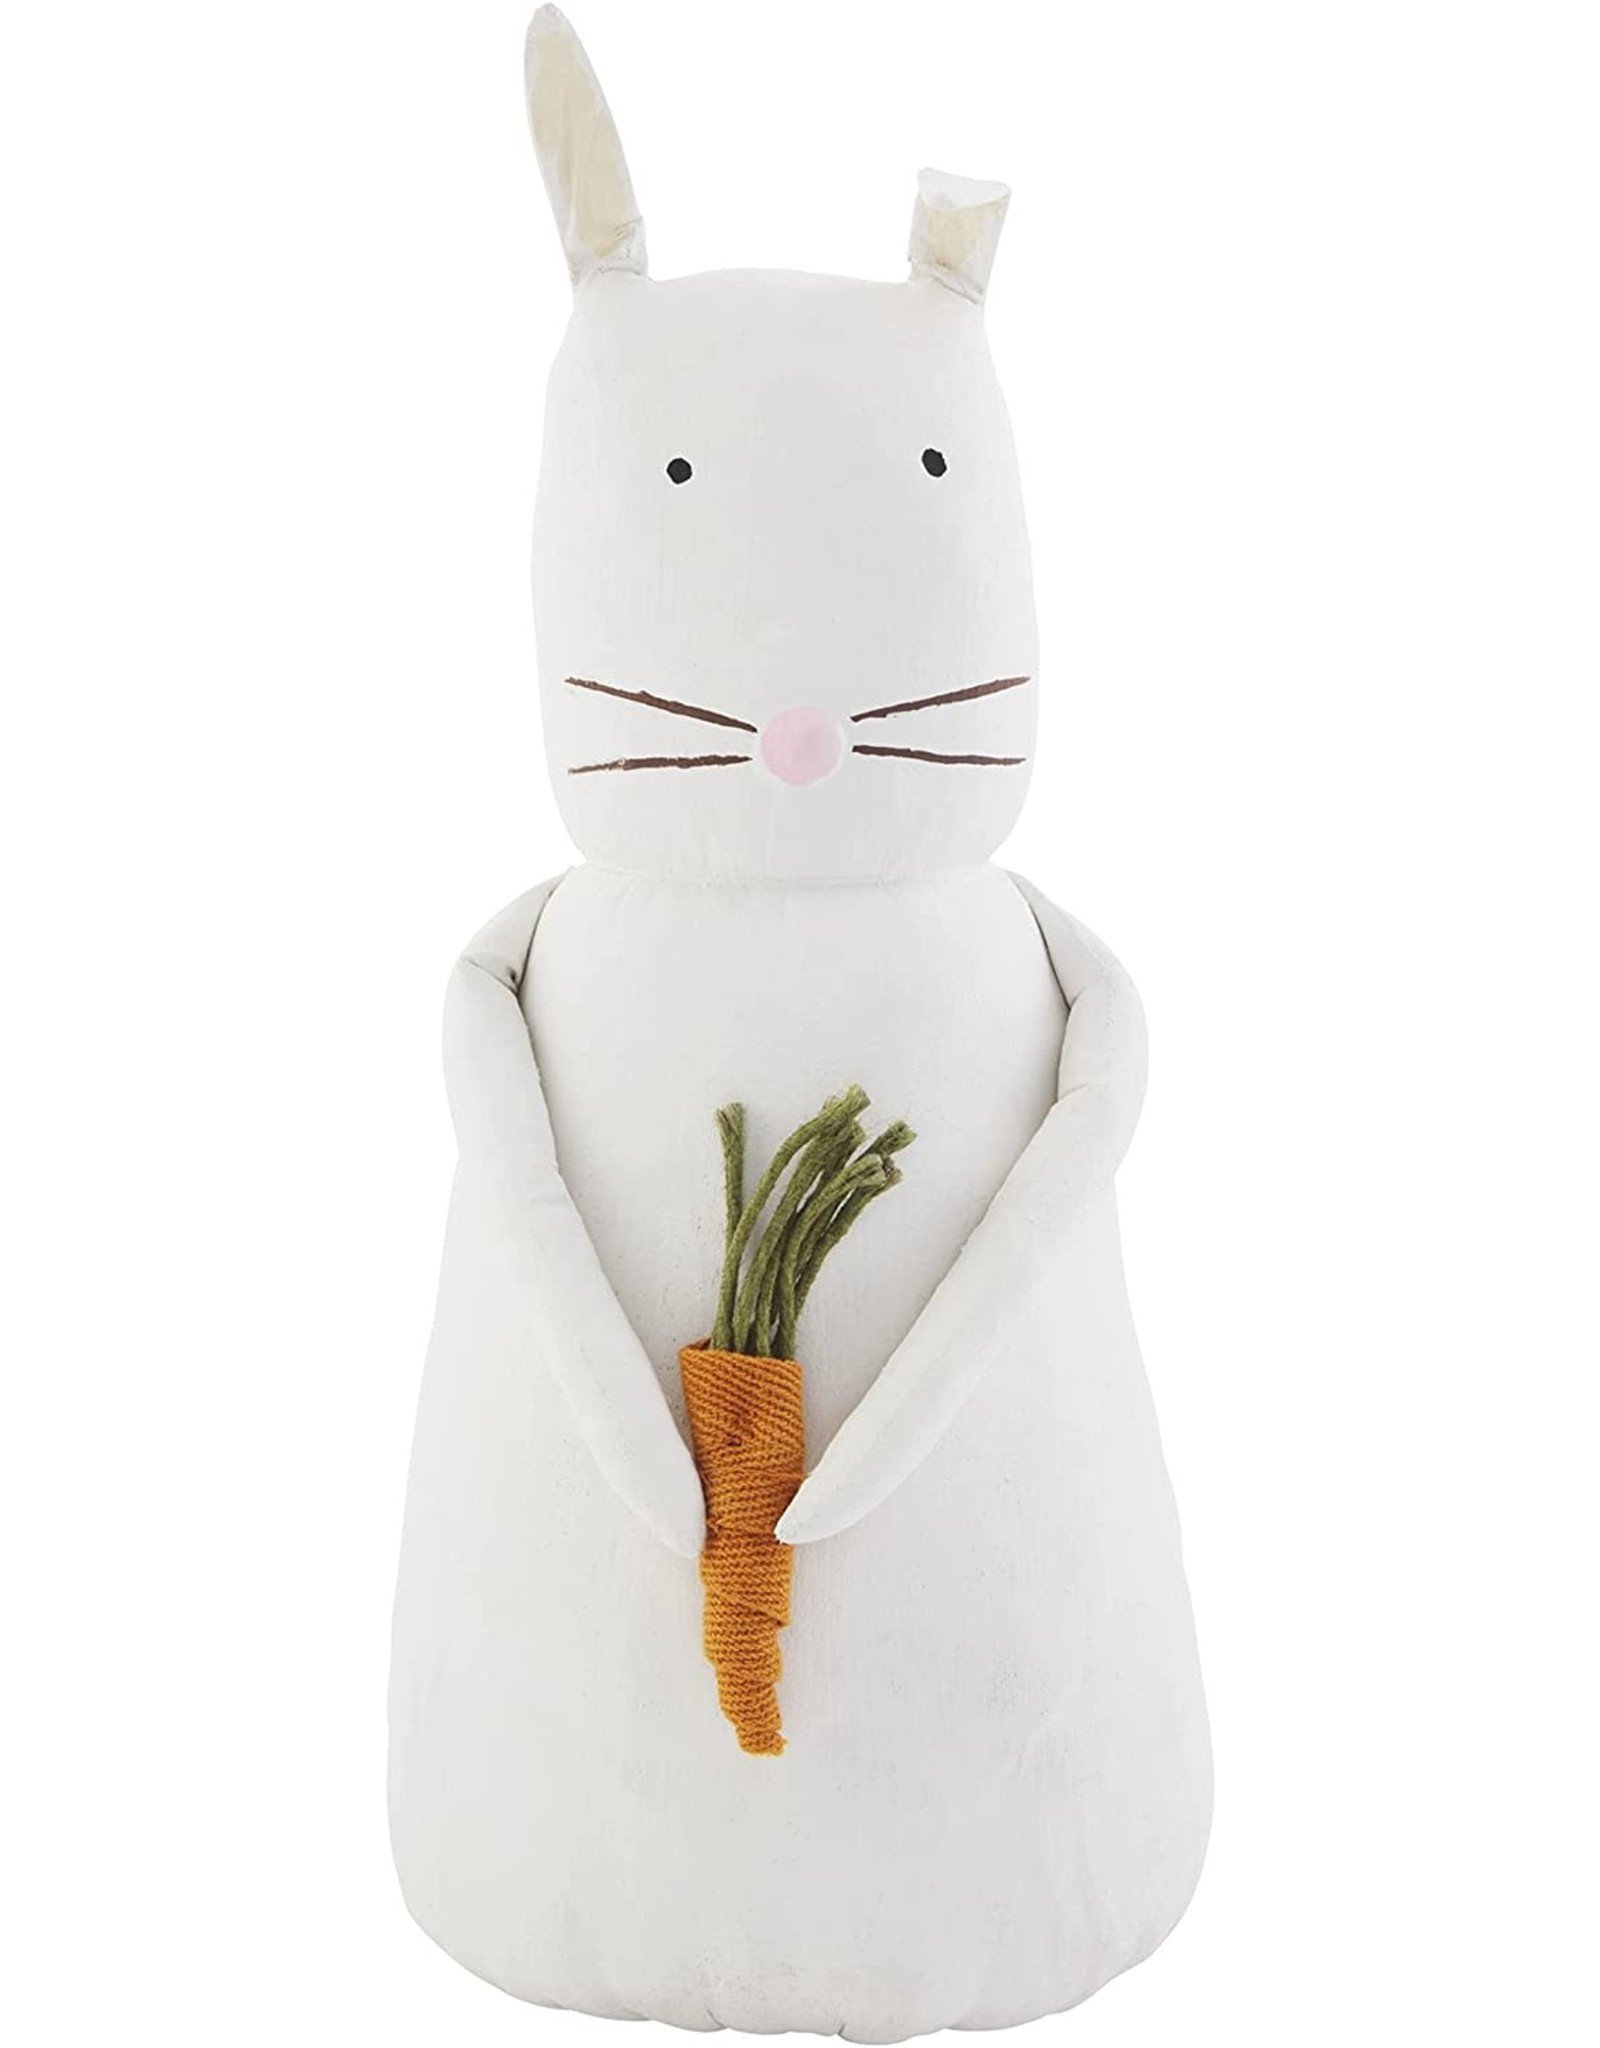 Mud Pie Bunny Sitter Hand Painted Canvas Bunny LG White w Carrot